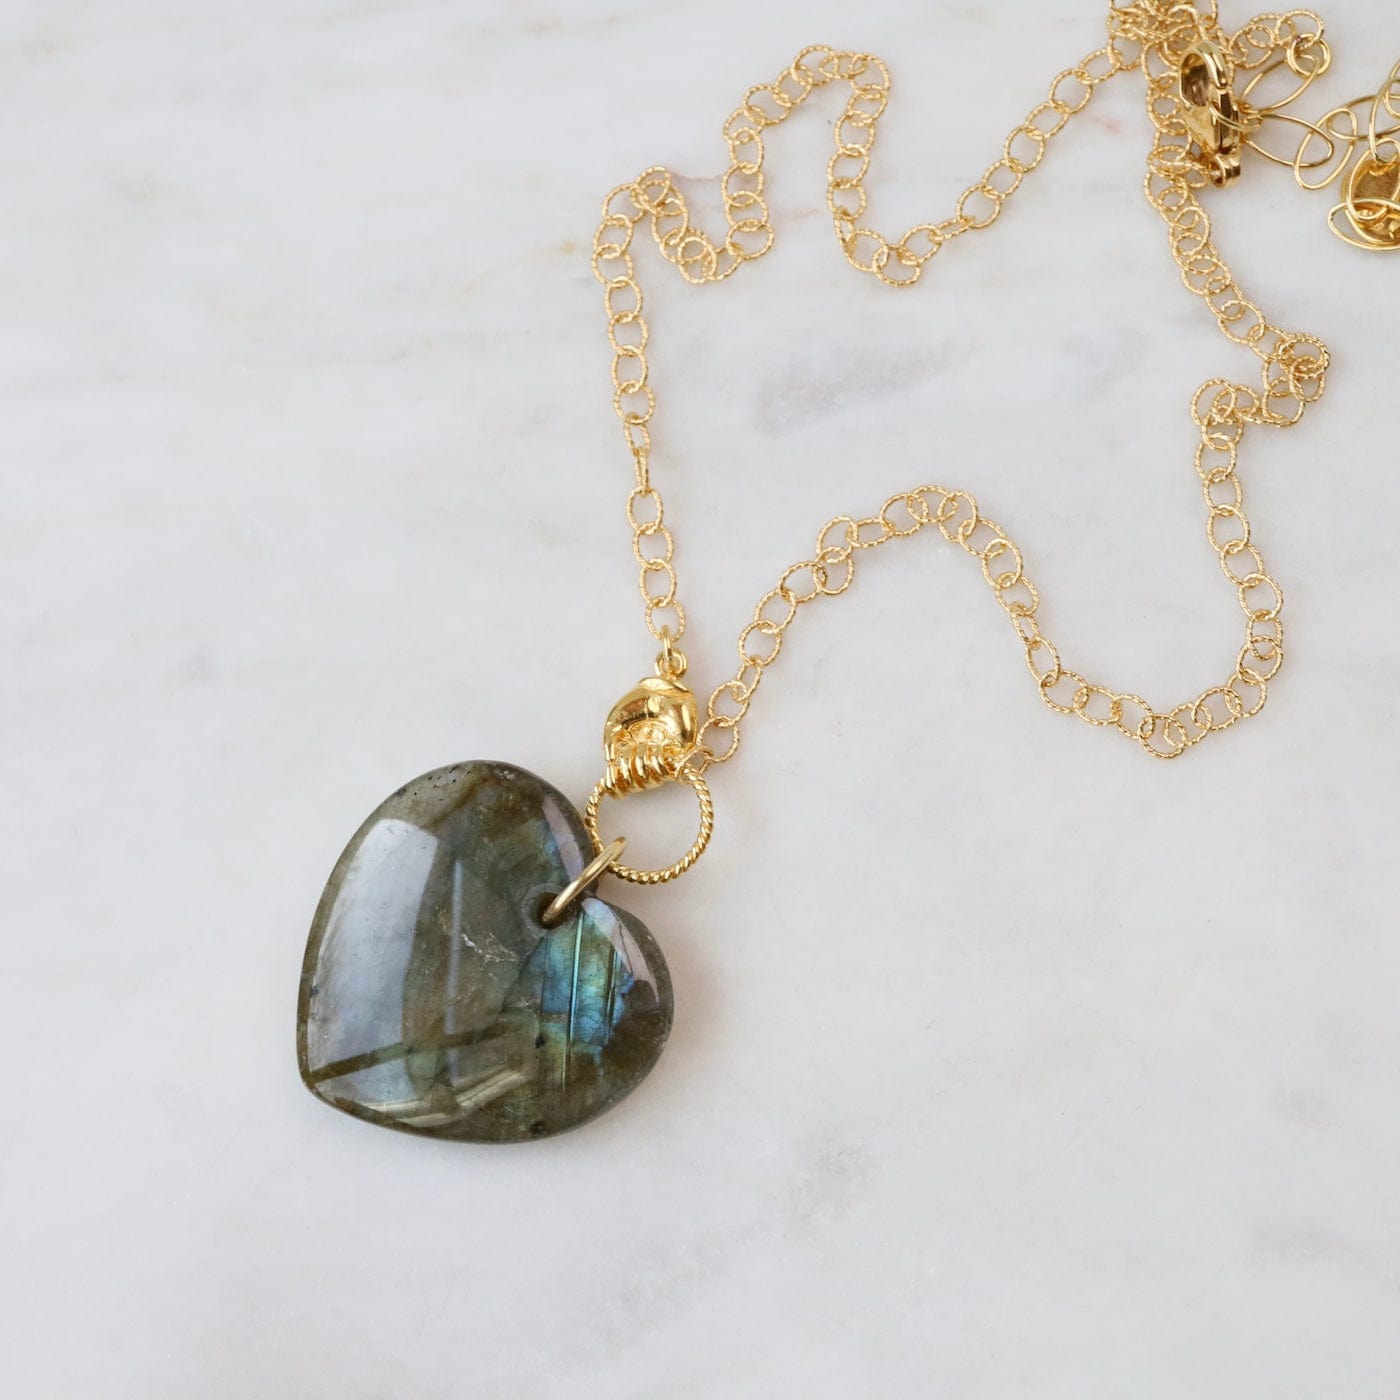 NKL-GPL Labradorite Heart In Hand Necklace